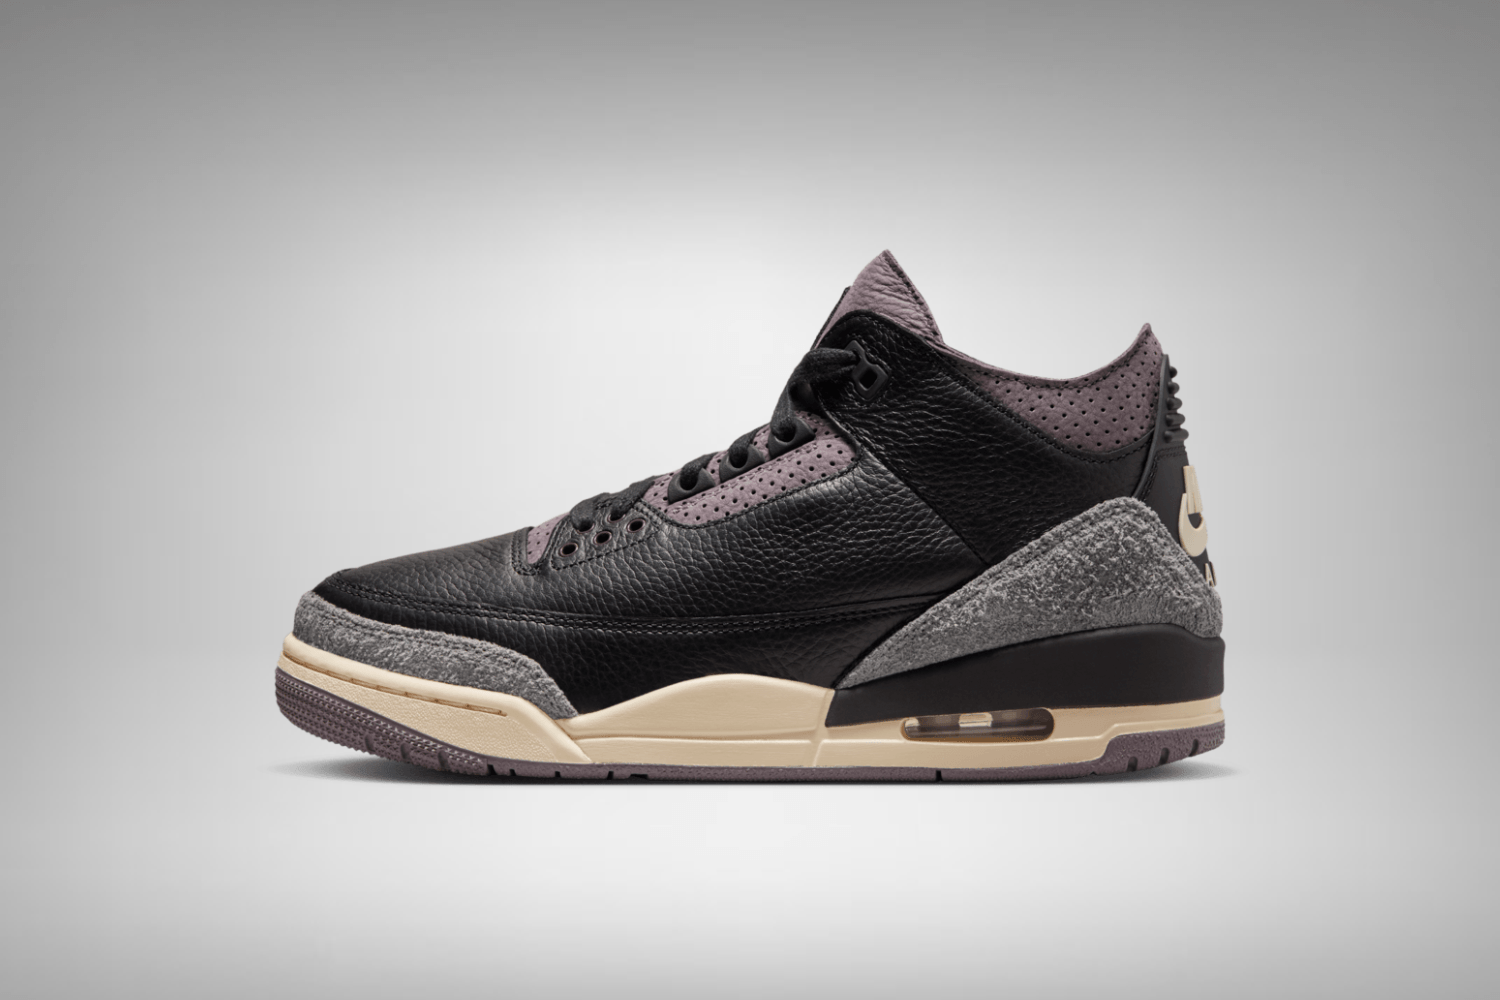 Official images of the A Ma Maniére x Air Jordan 3 in 'Black'